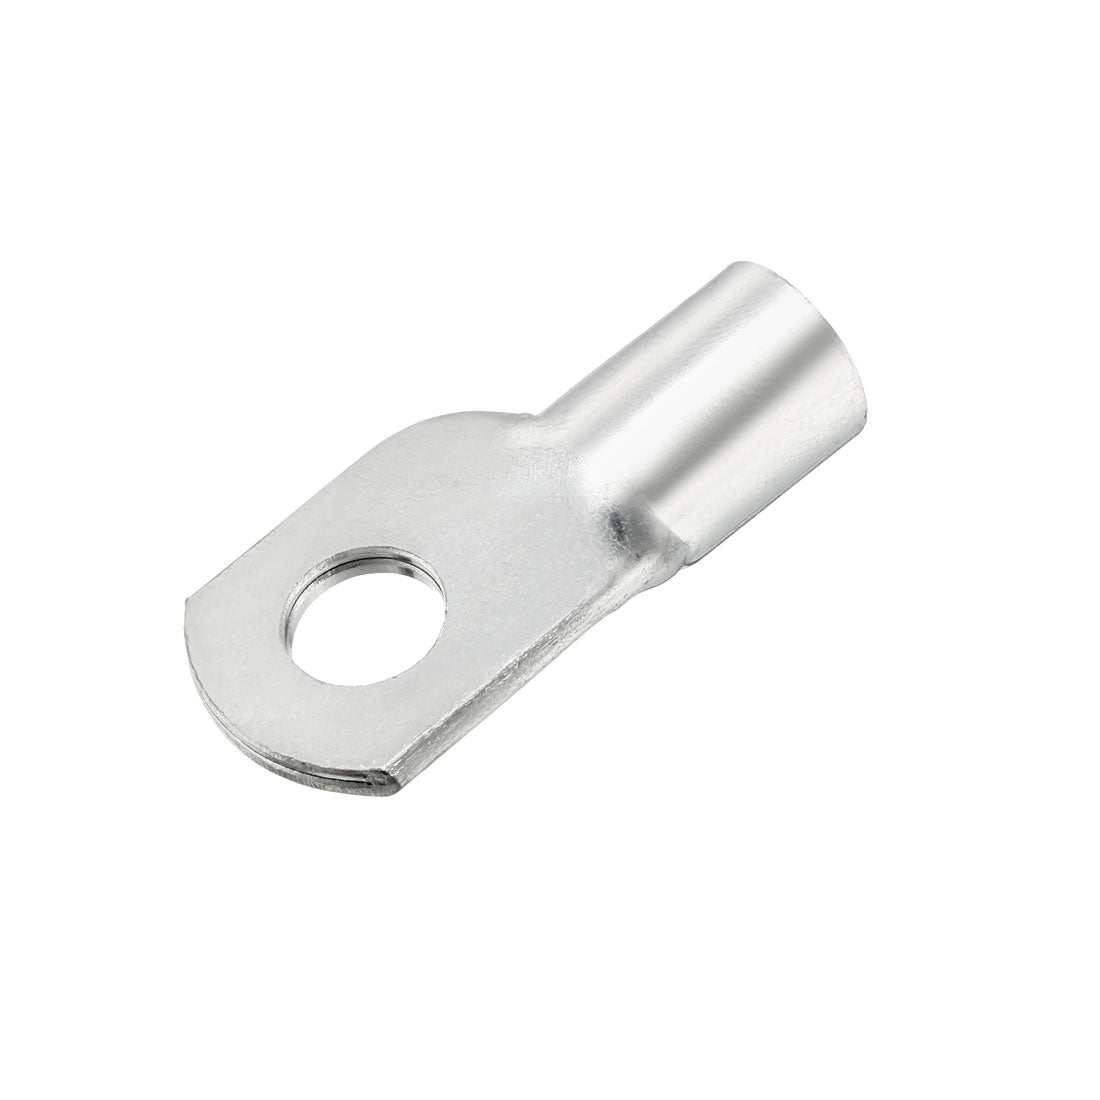 uxcell Uxcell 5Pcs SC70-10 Non-Insulated U-Type Copper Crimp Terminals 50mm Wire Connector Silver Tone